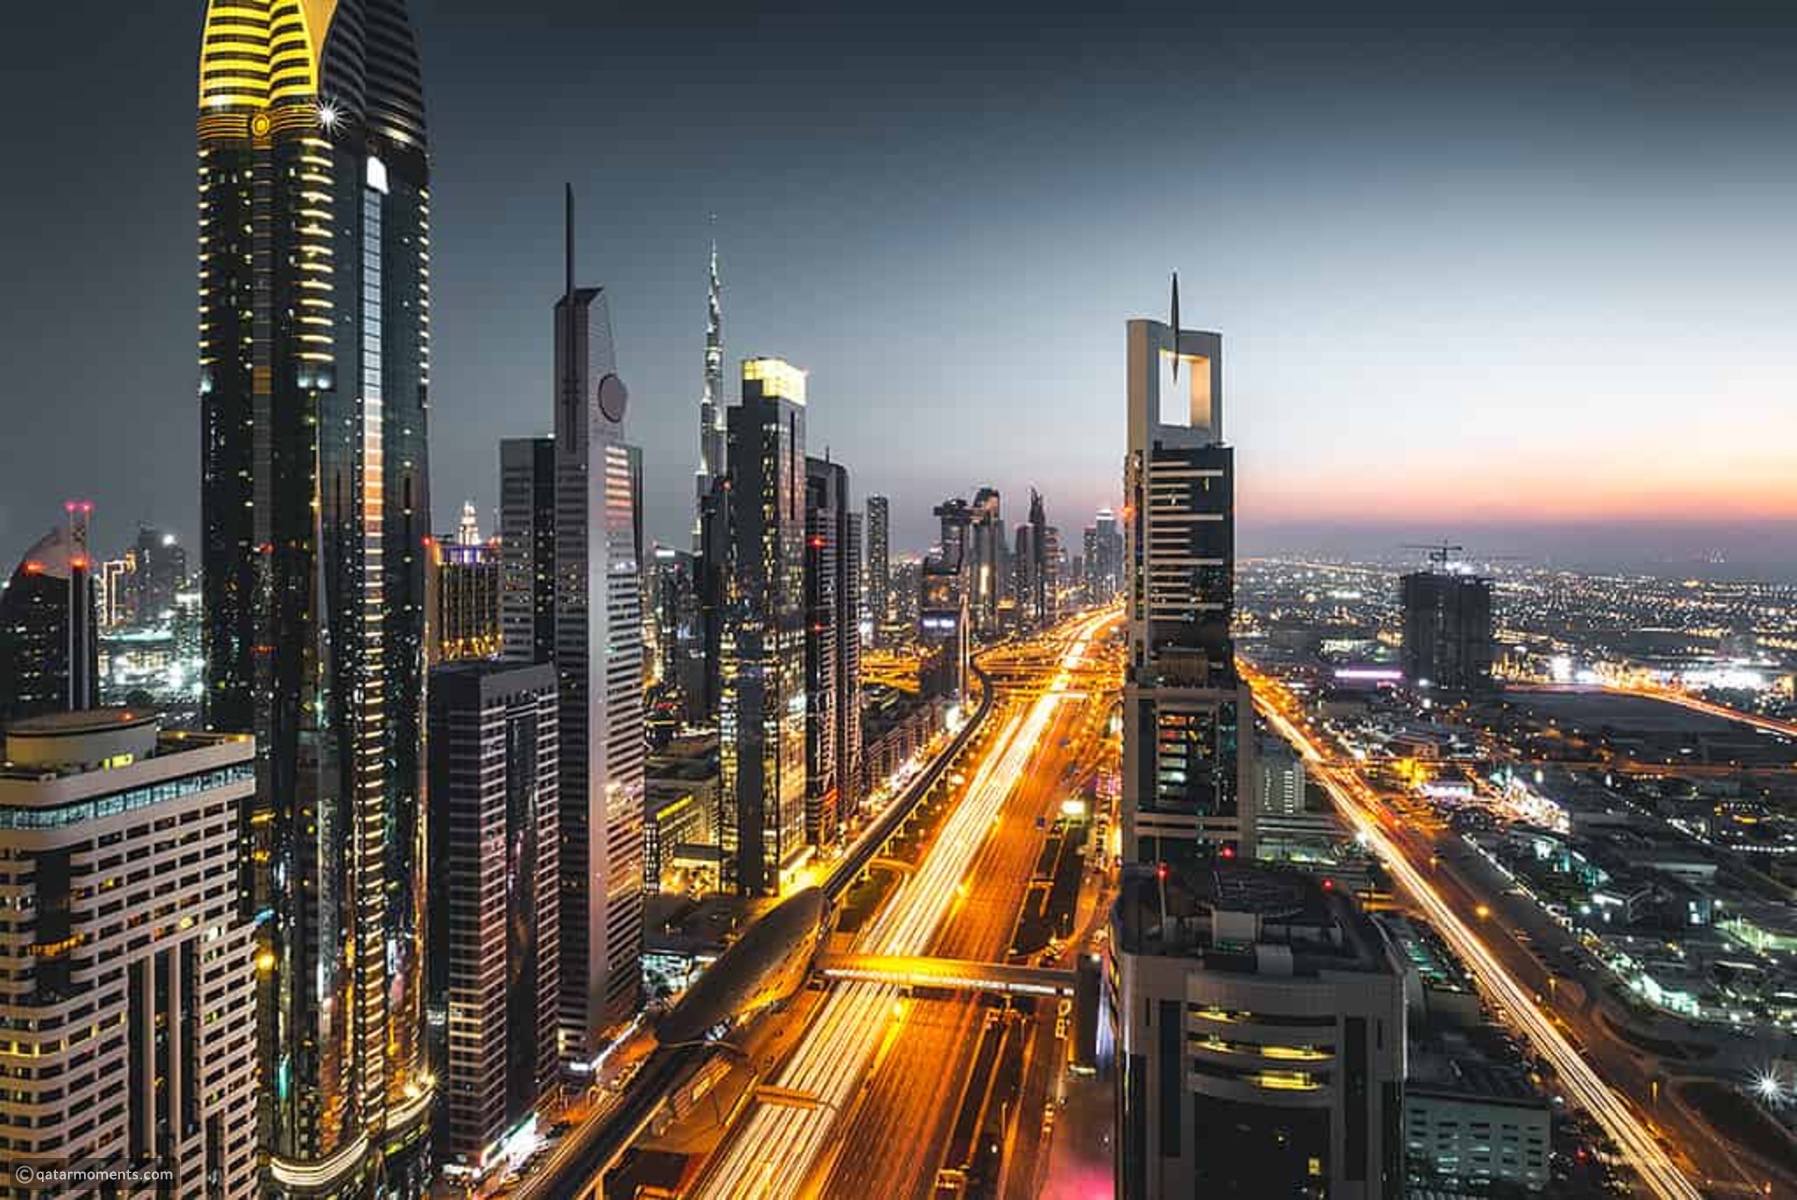 qatar and uae rank among world's top 10 richest countries!